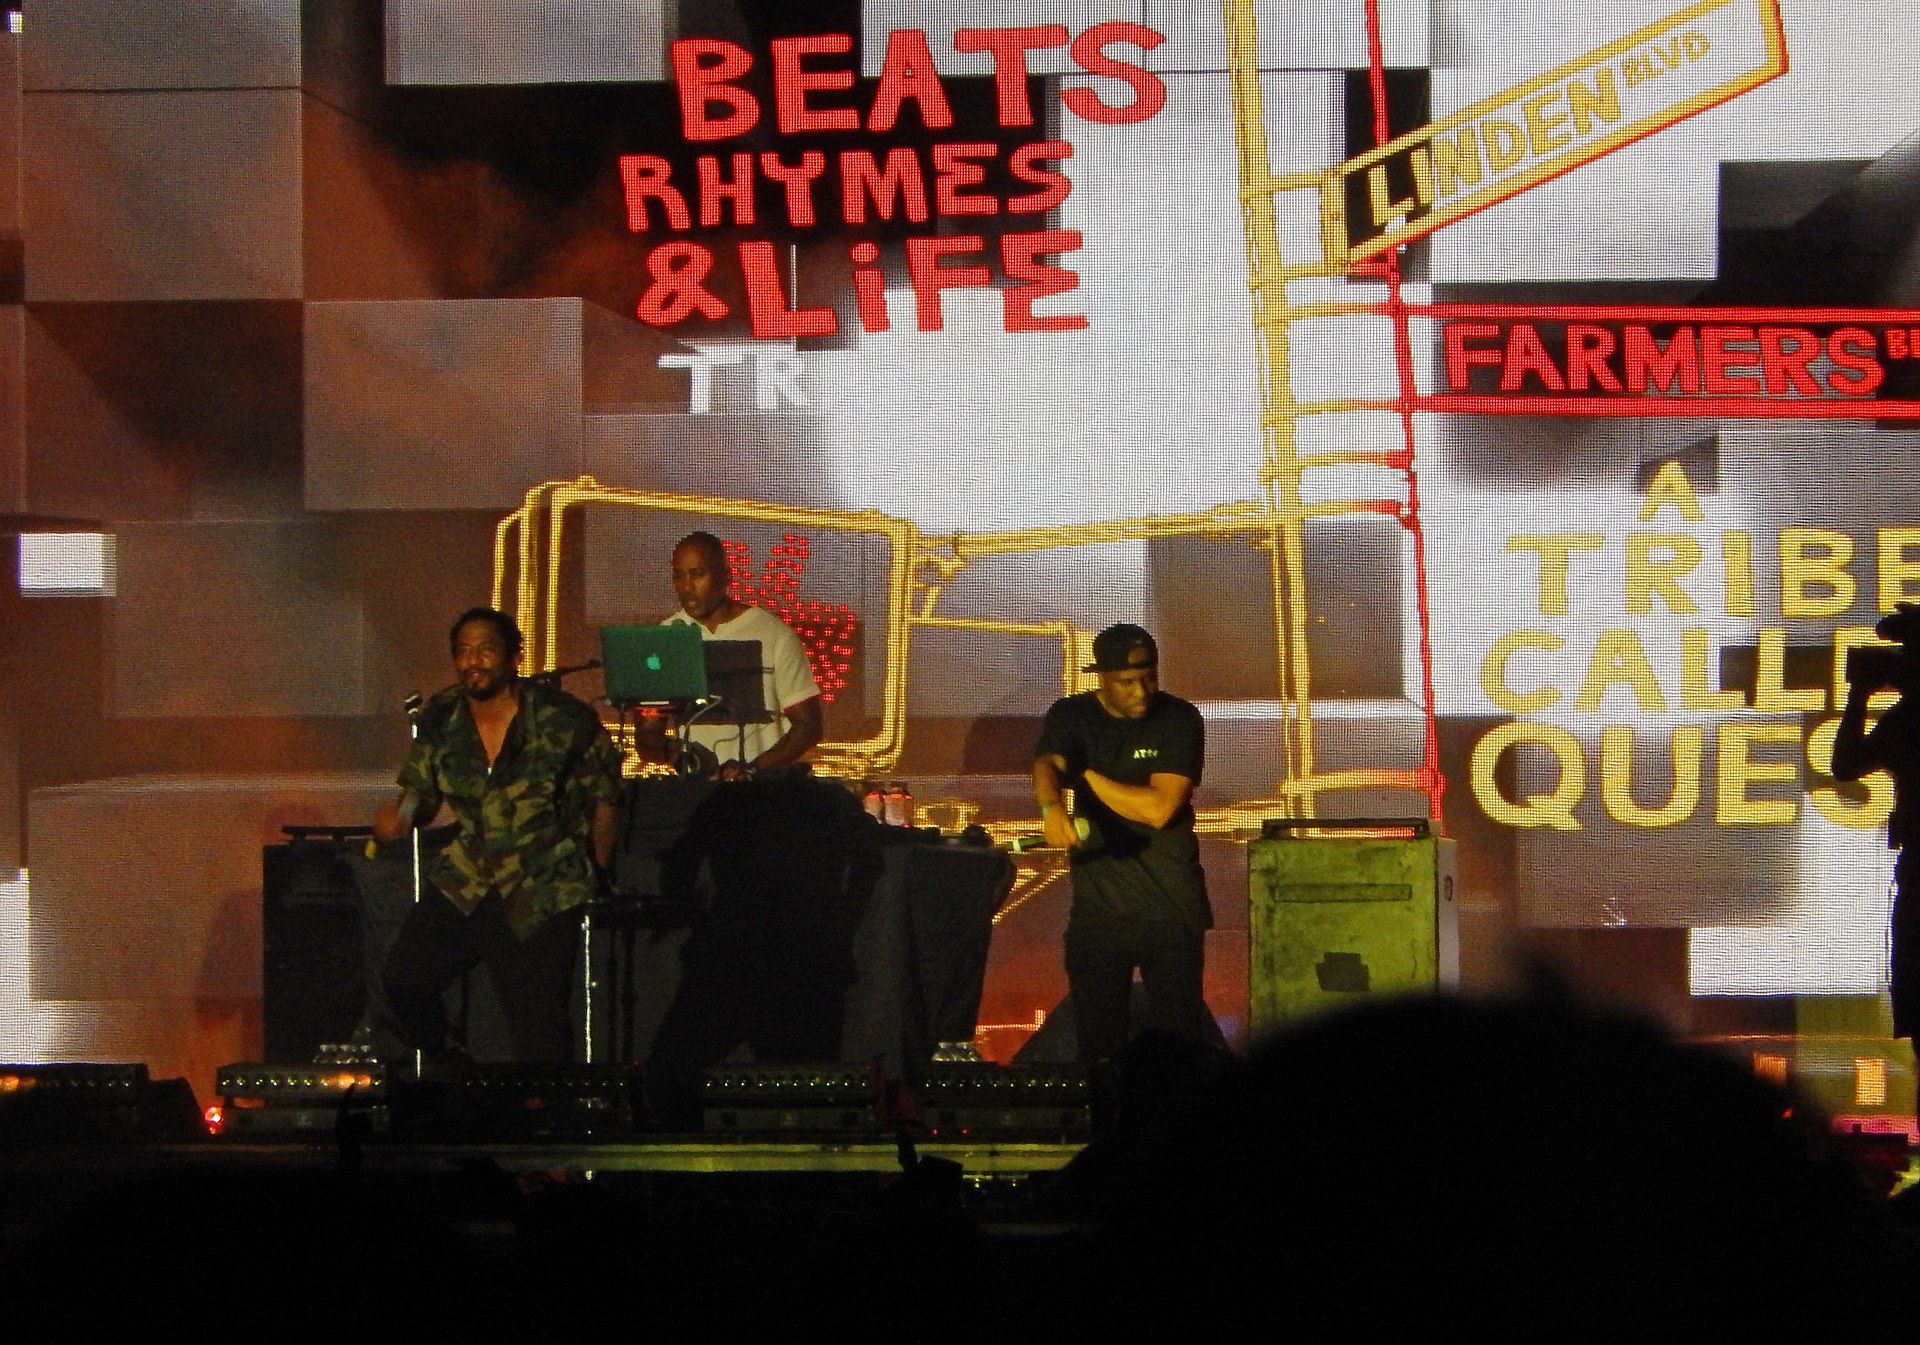 <p>After founding members Q-Tip and Phife Dog set aside differences to begin recording again in 2013, the group headlined a festival in 2004 and then reunited as a touring act again — in part to help with Phife Dog's medical expenses. The band continued to play various shows and tours in the years to follow and released their sixth studio album in 2016, shortly after the passing of Phife Dog, who died from complications with diabetes. Surviving members played their final concert in 2017.</p>